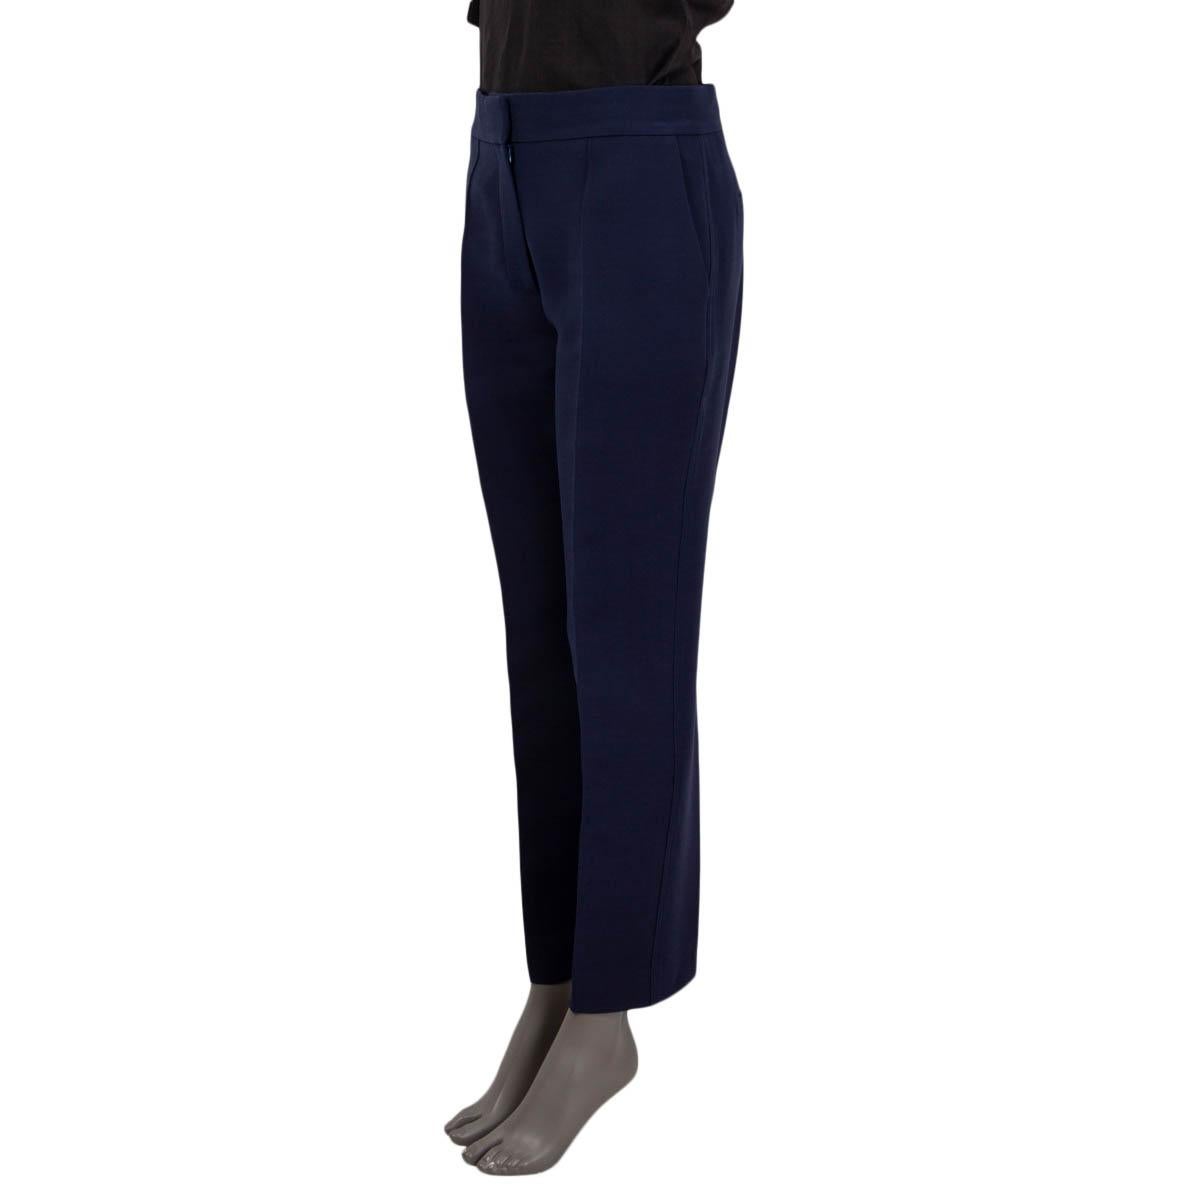 100% authentic Christian Dior suit pants in navy blue wool (77%) and silk (23%). Features two two slit pockets on the front and two slit pockets on the back. Open with a concealed hook, button and zipper on the front. Unlined. Have some dark stains